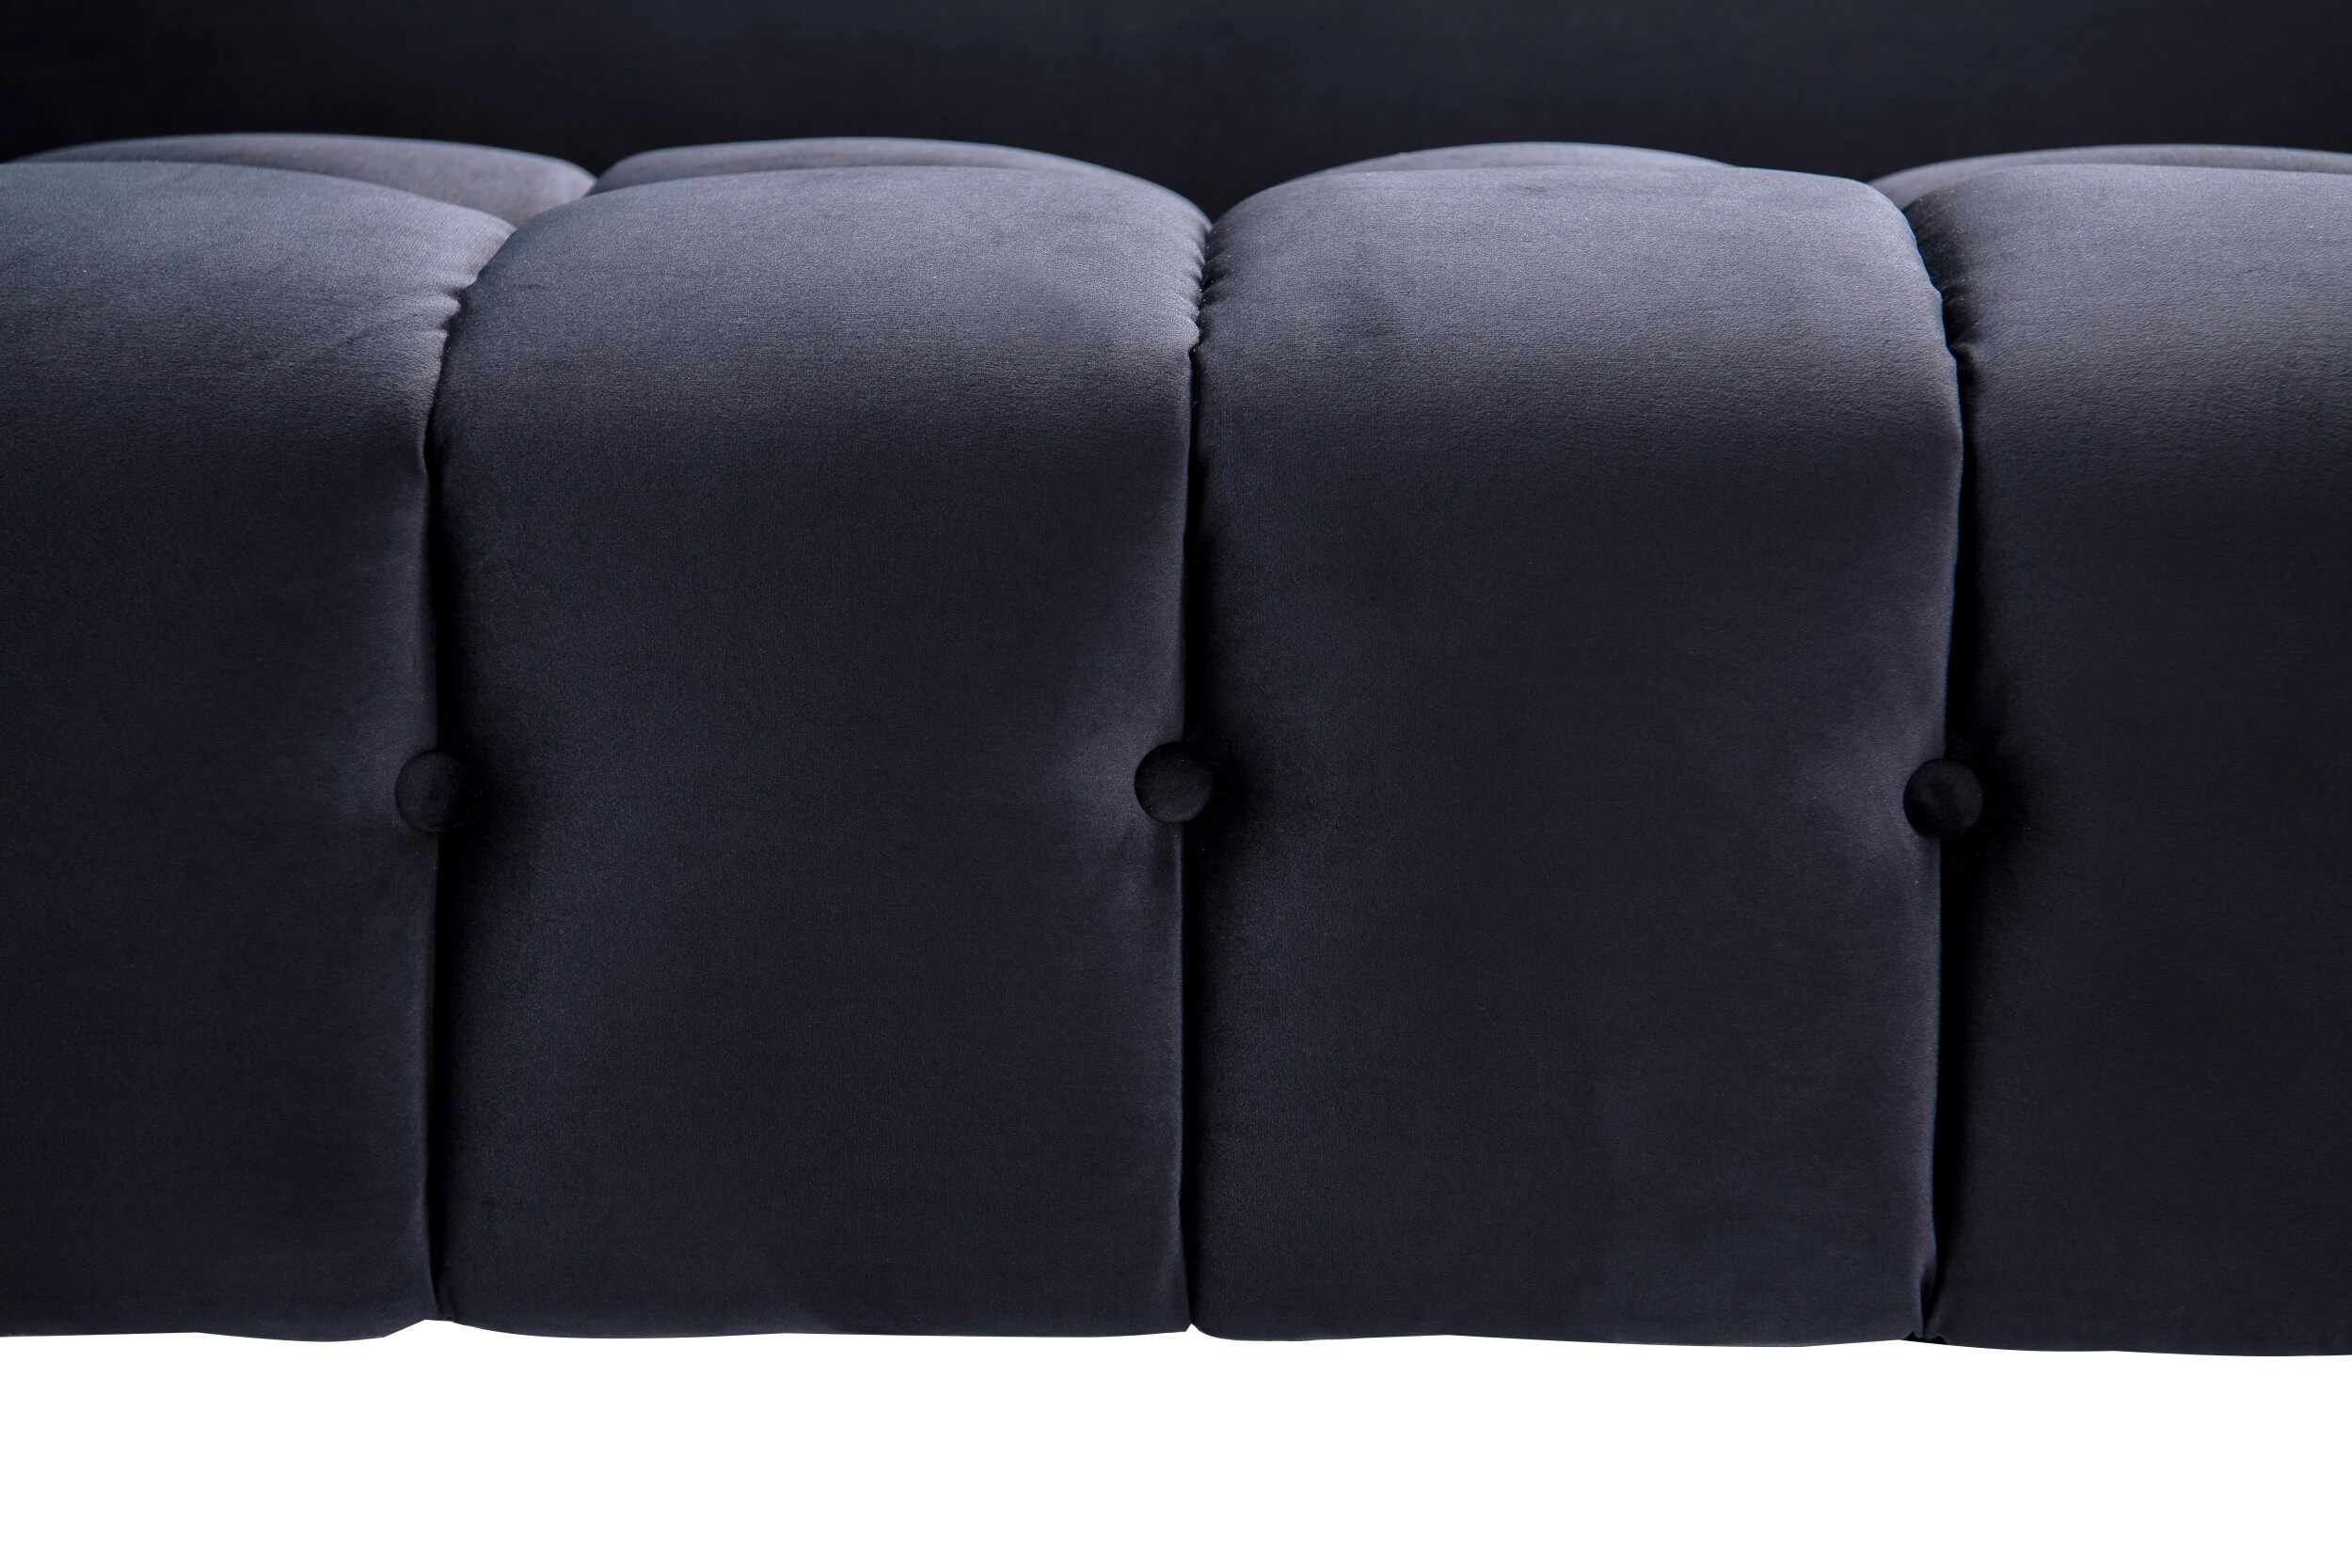 SMILEY, Couches Bébé Jumbo Taille 3(5-10kg) 88 Couches – LJA Store